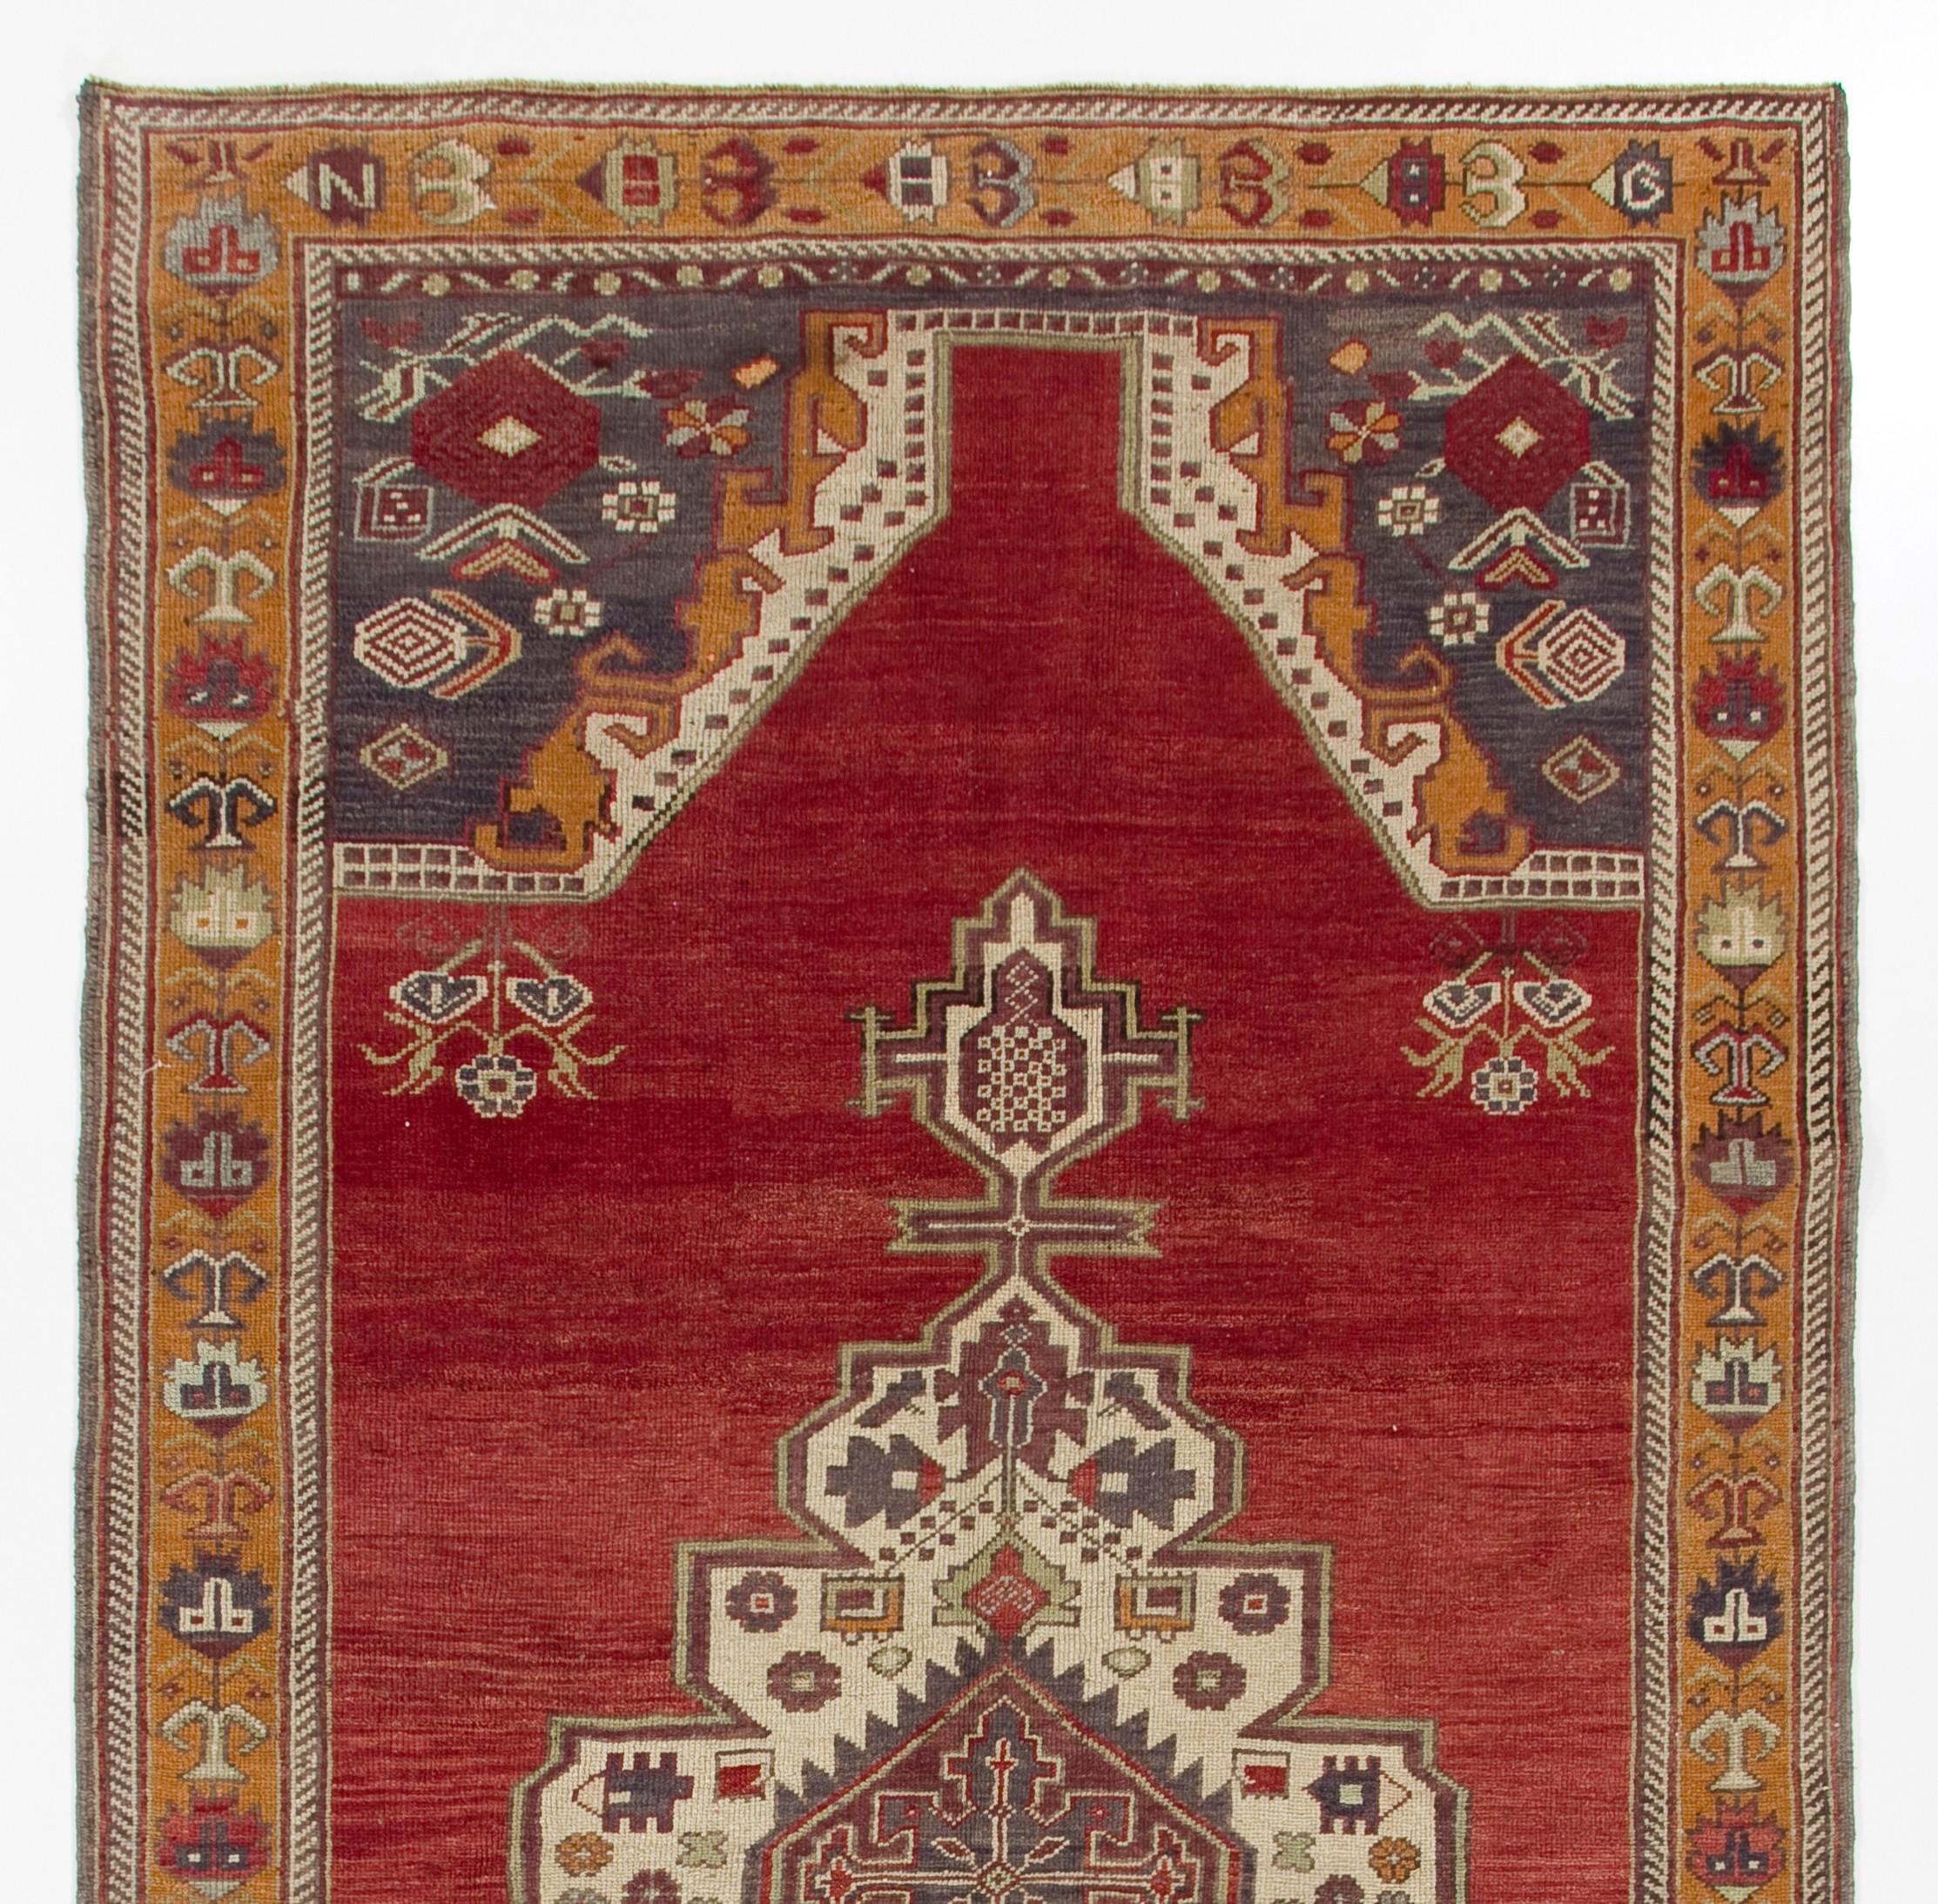 Oushak 6x12 Ft One-of-a-Kind Vintage Handmade Turkish Rug in Red, Indigo and Marigold For Sale